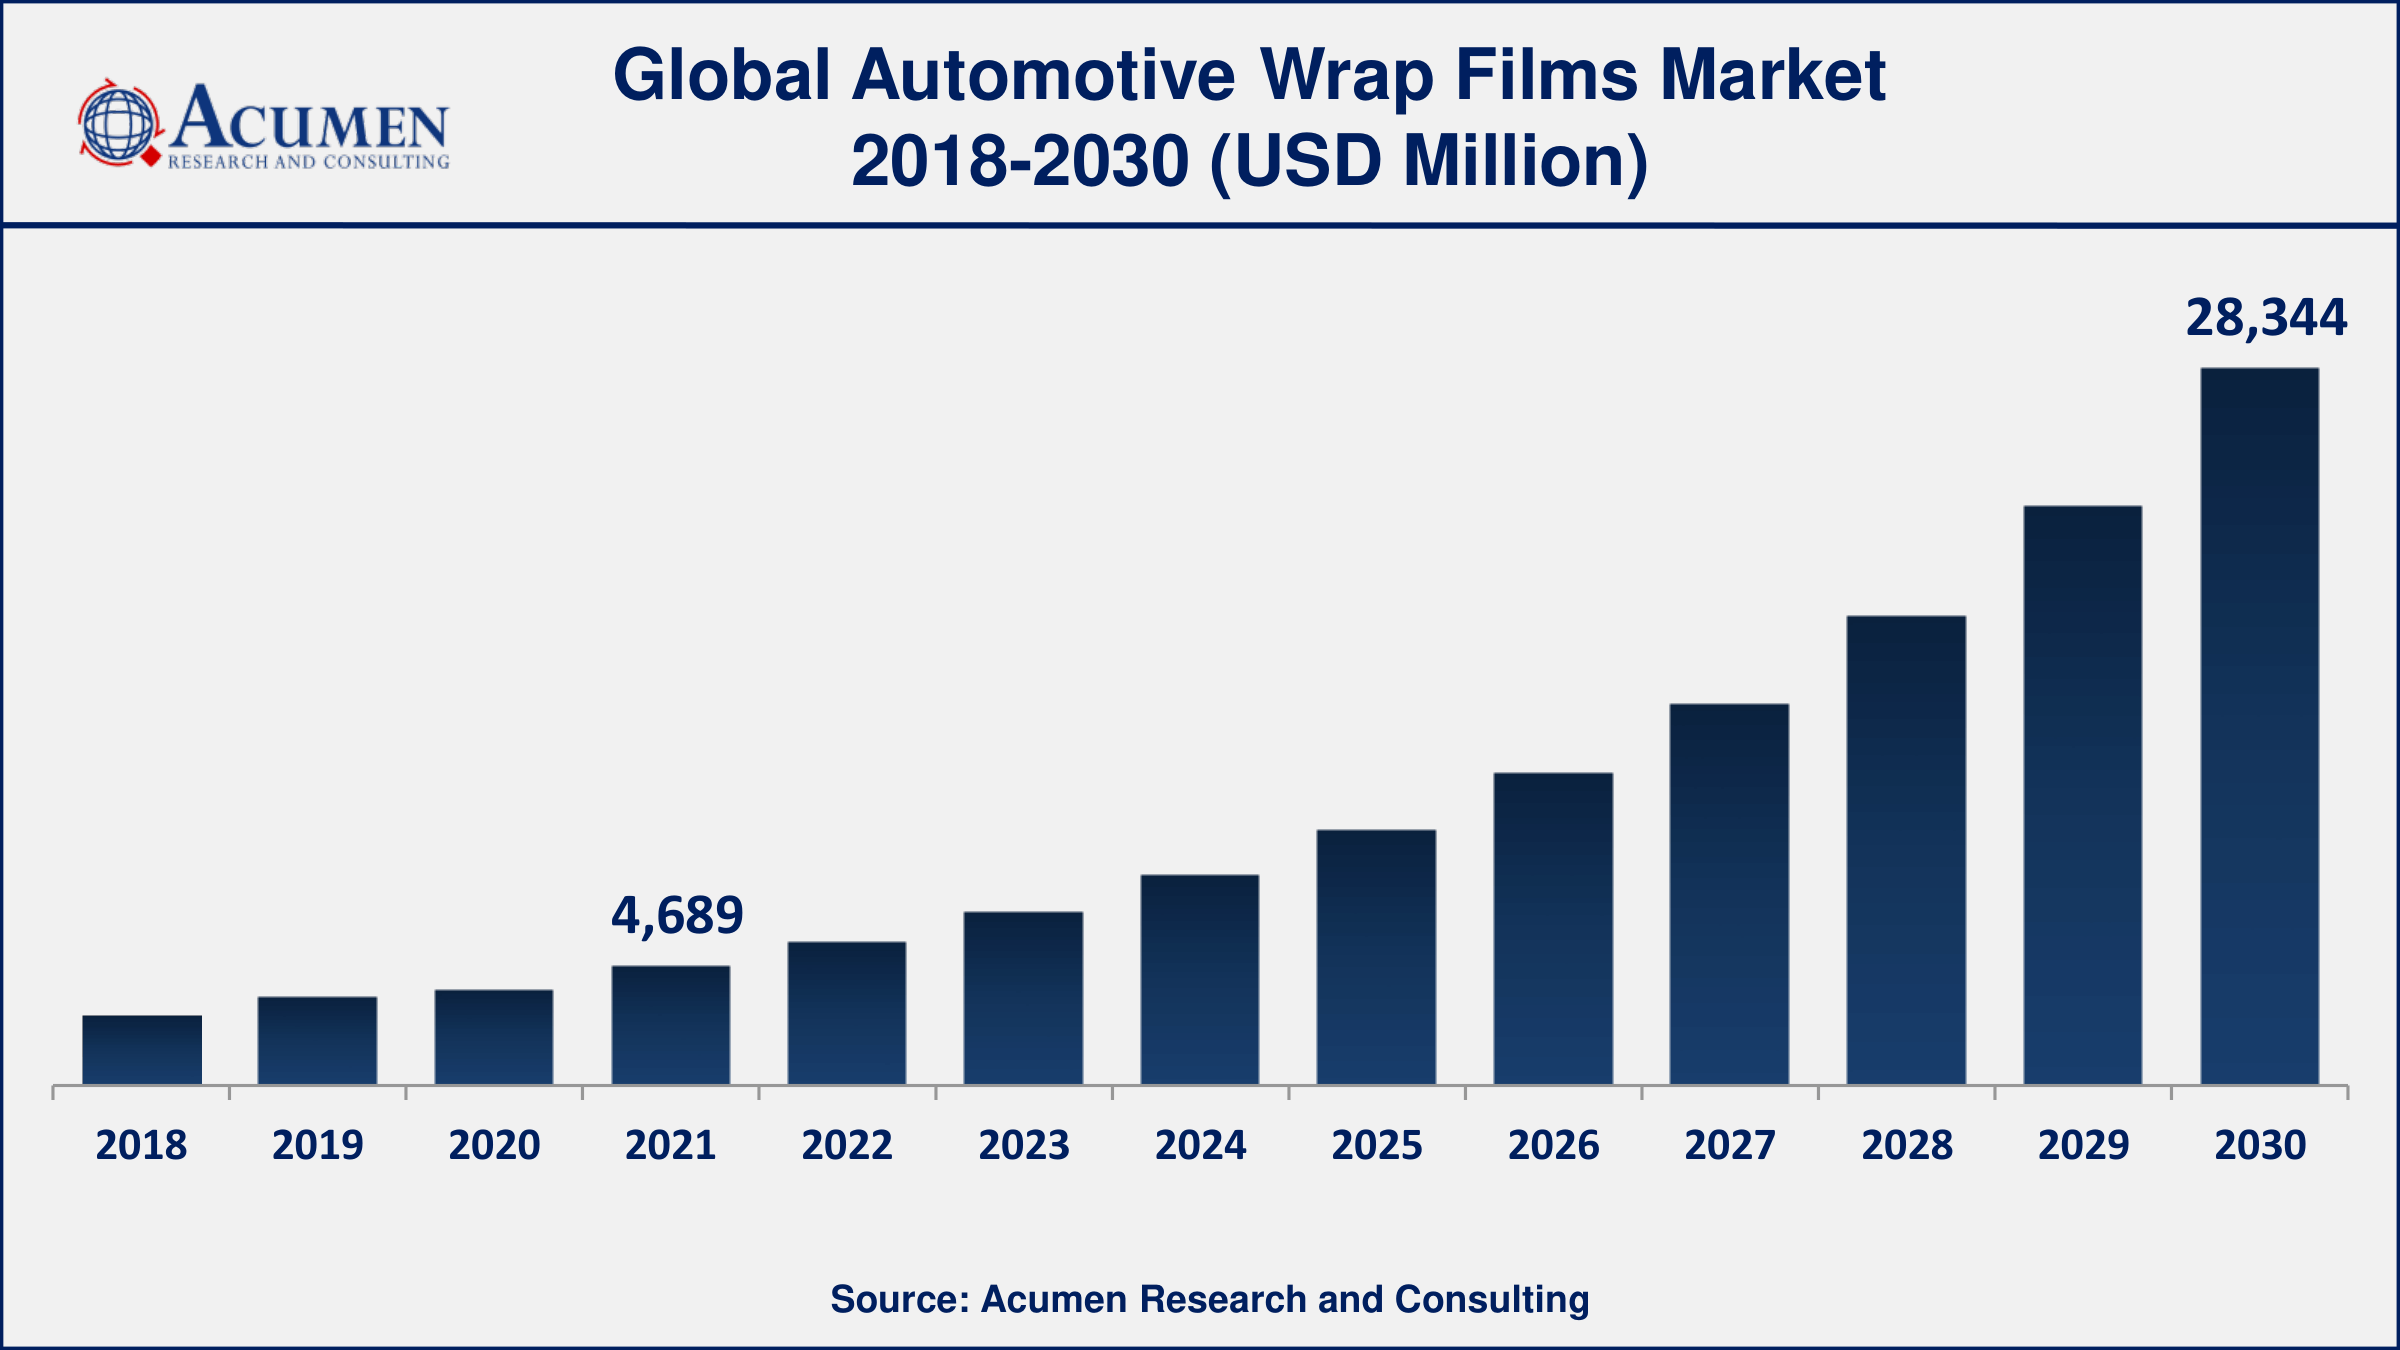 Asia-Pacific automotive wrap films market growth will observe strongest CAGR from 2022 to 2030